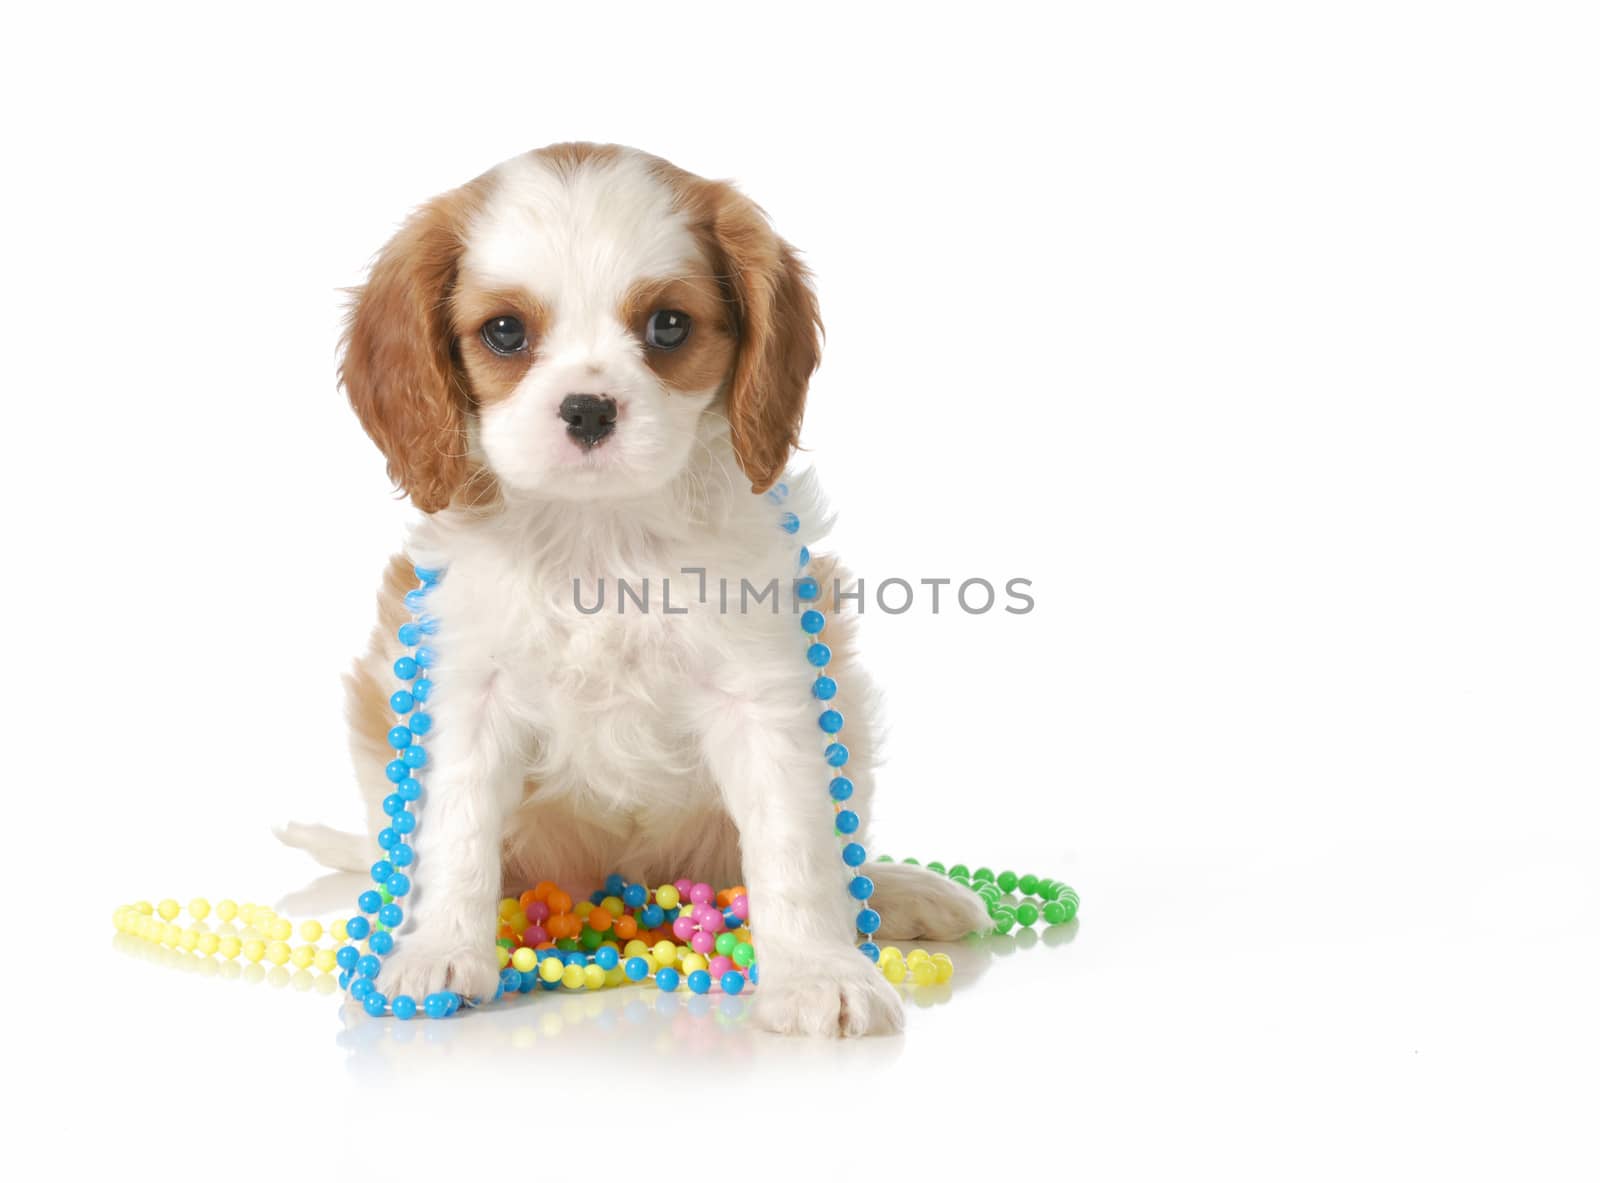 cute puppy - female cavalier king charles spaniel puppy sitting looking at viewer isolated on white background - 10 weeks old